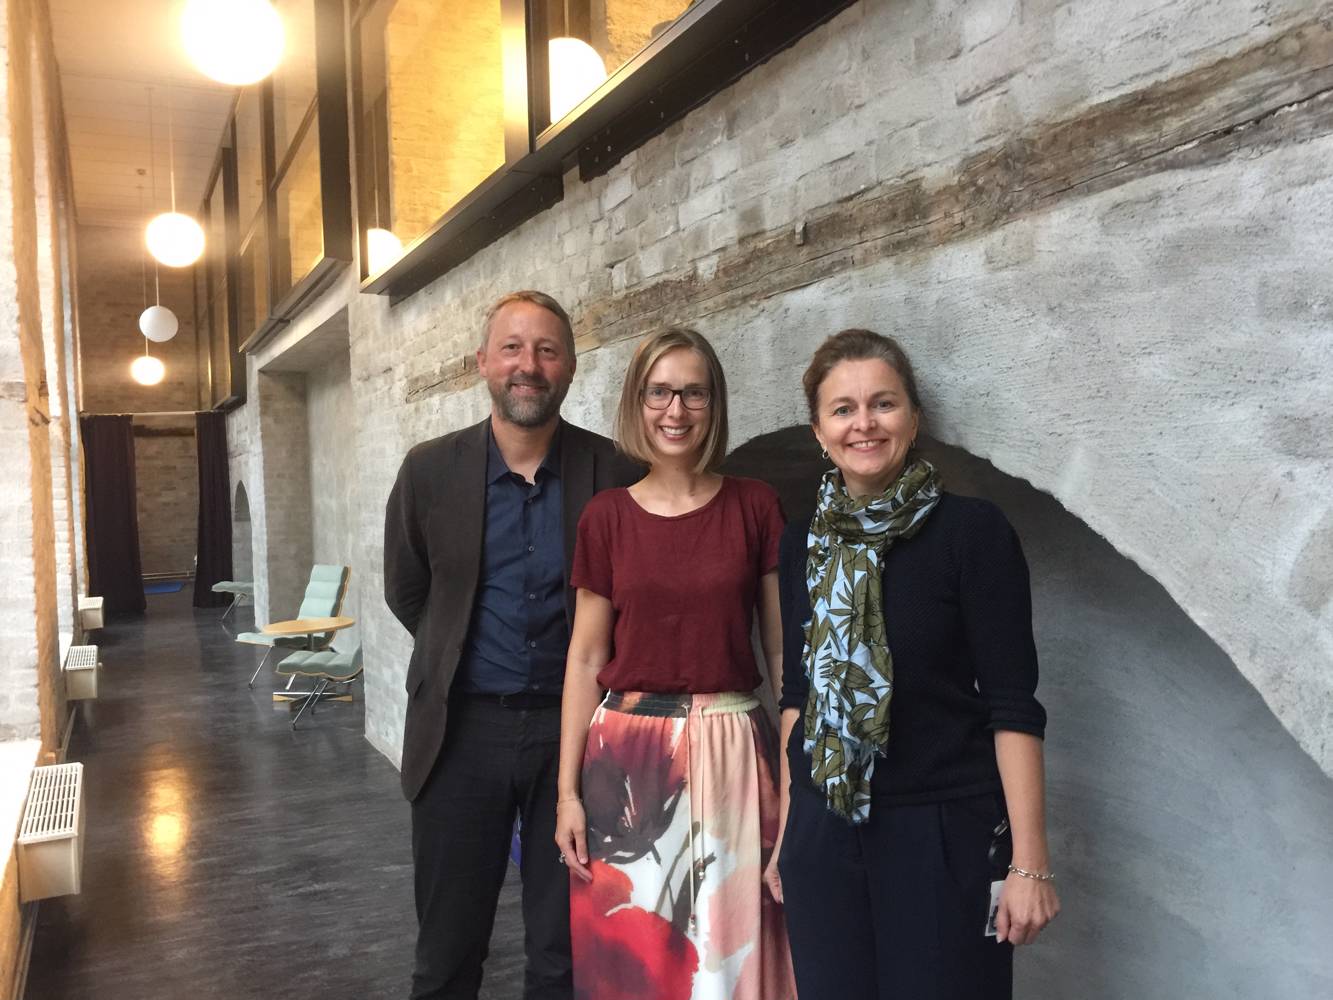 The Minister of Research and Education in Norway visited PRIO August 2018. Photo: Gee Berry / PRIO